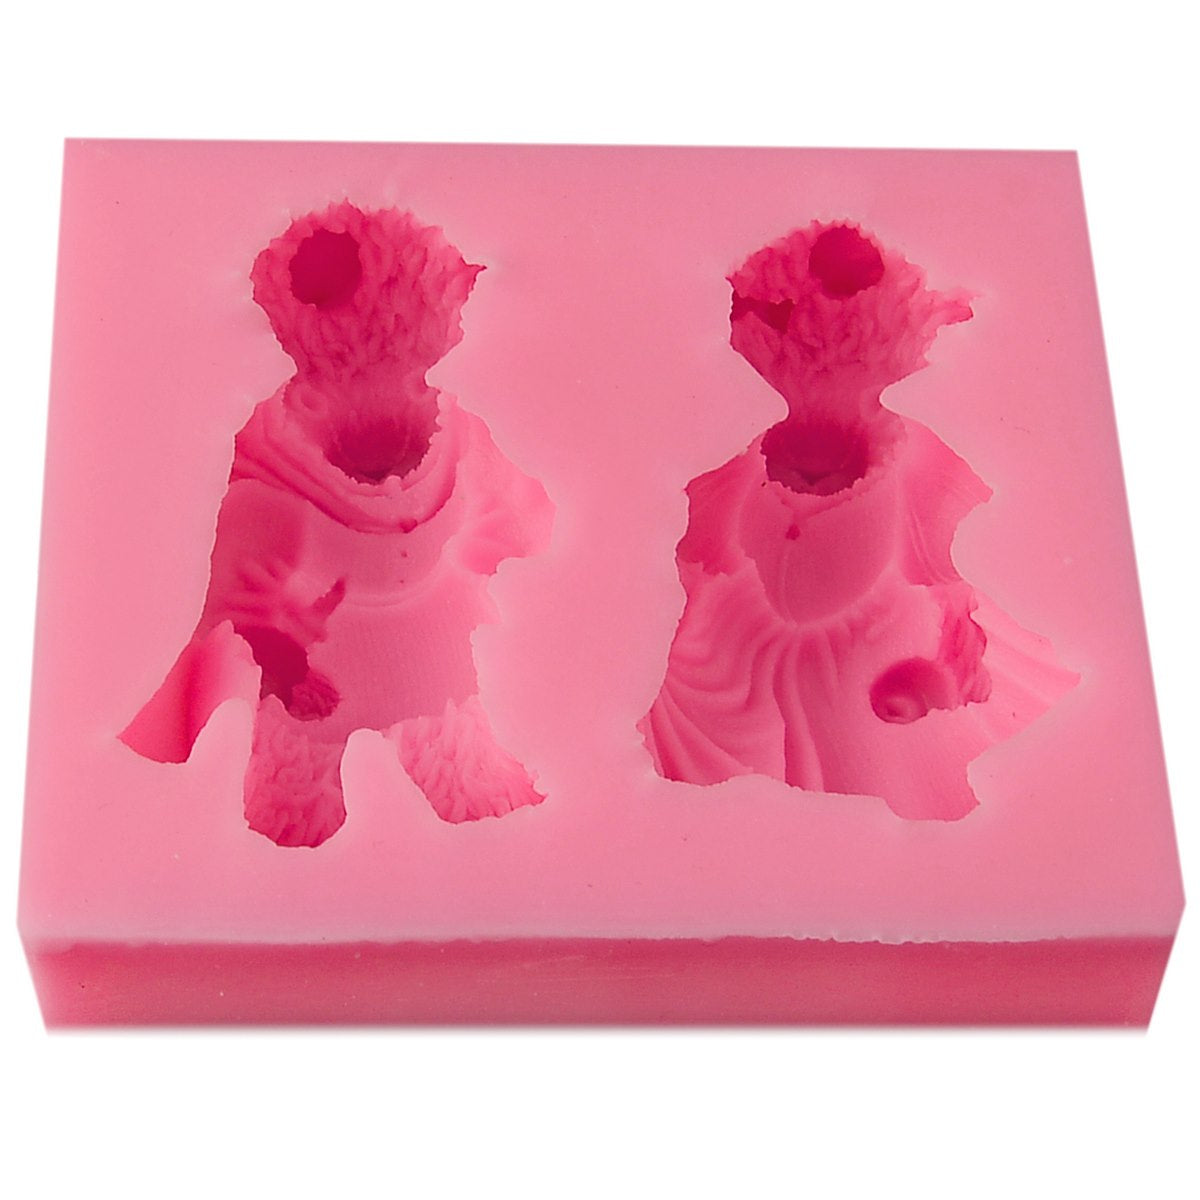 jags-mumbai Mould Silicone Mould Couple Teddy JSF265